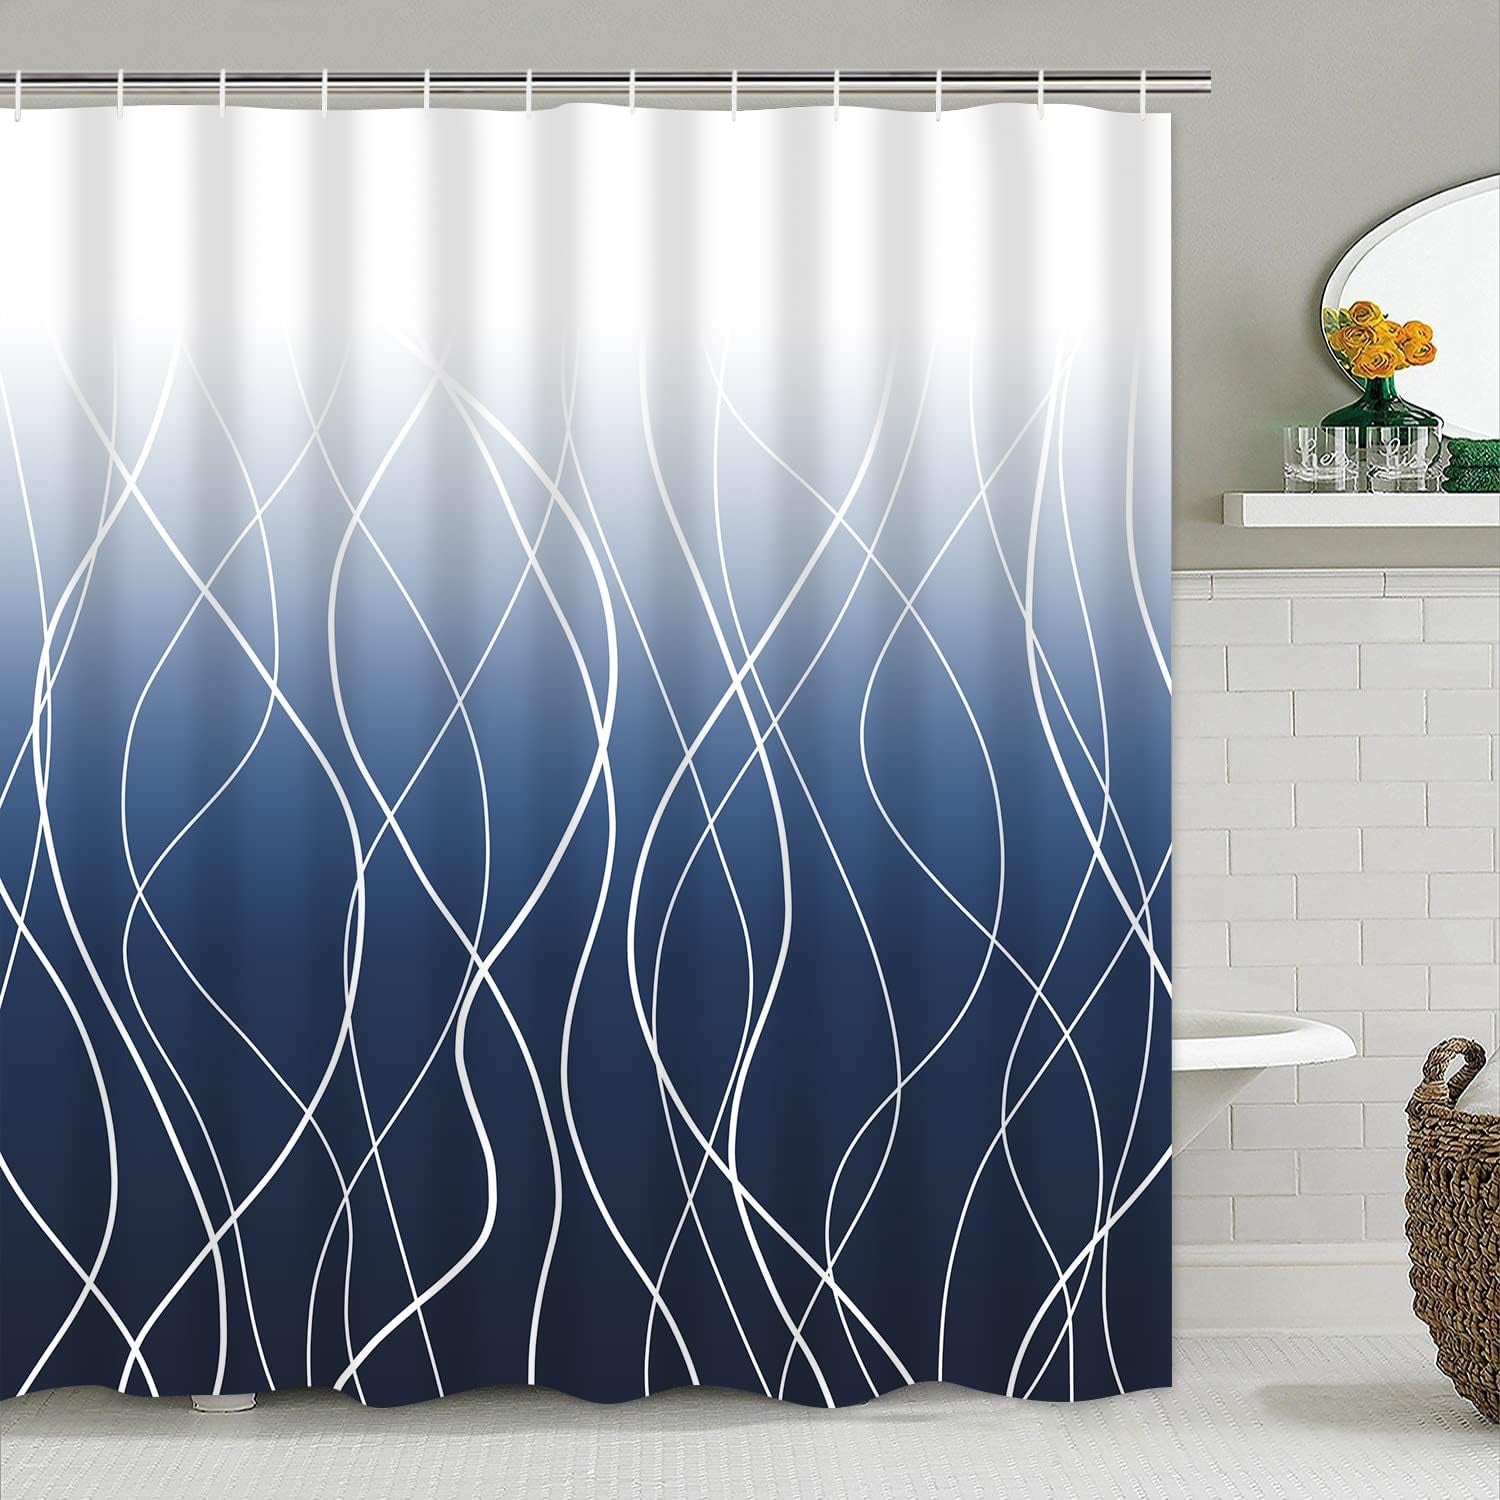 Blue Shower Curtain Sets with Rugs, Ombre Blue White Stripe Bathroom Curtain Set with Rugs Modernshower Curtain with Non-Slip Rug, Toilet Lid Cover and Bath Mat